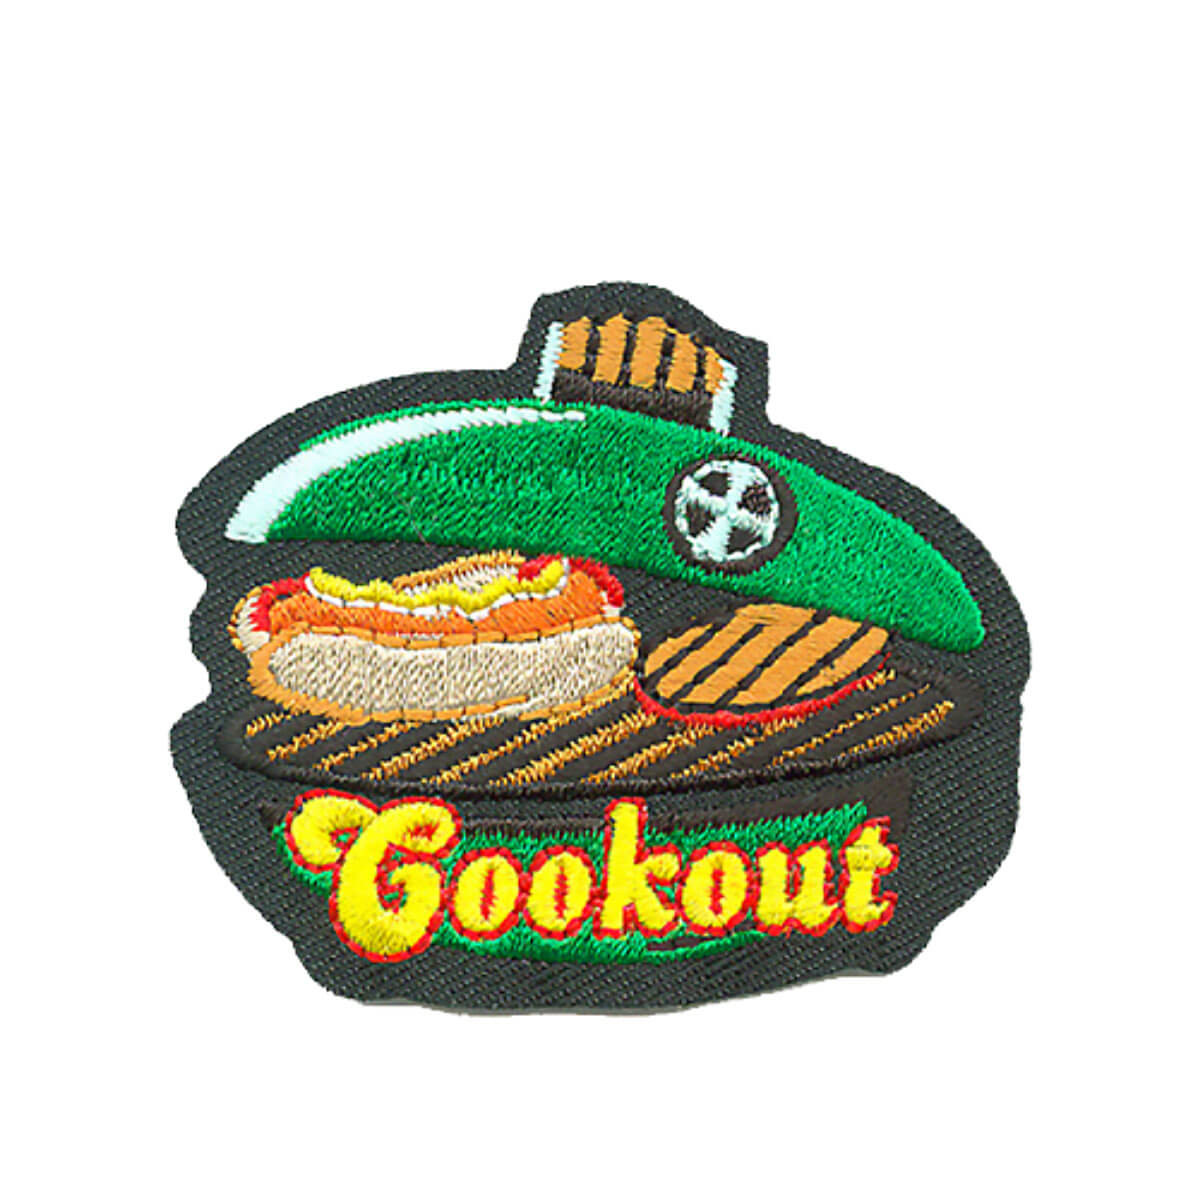 Cookout - W